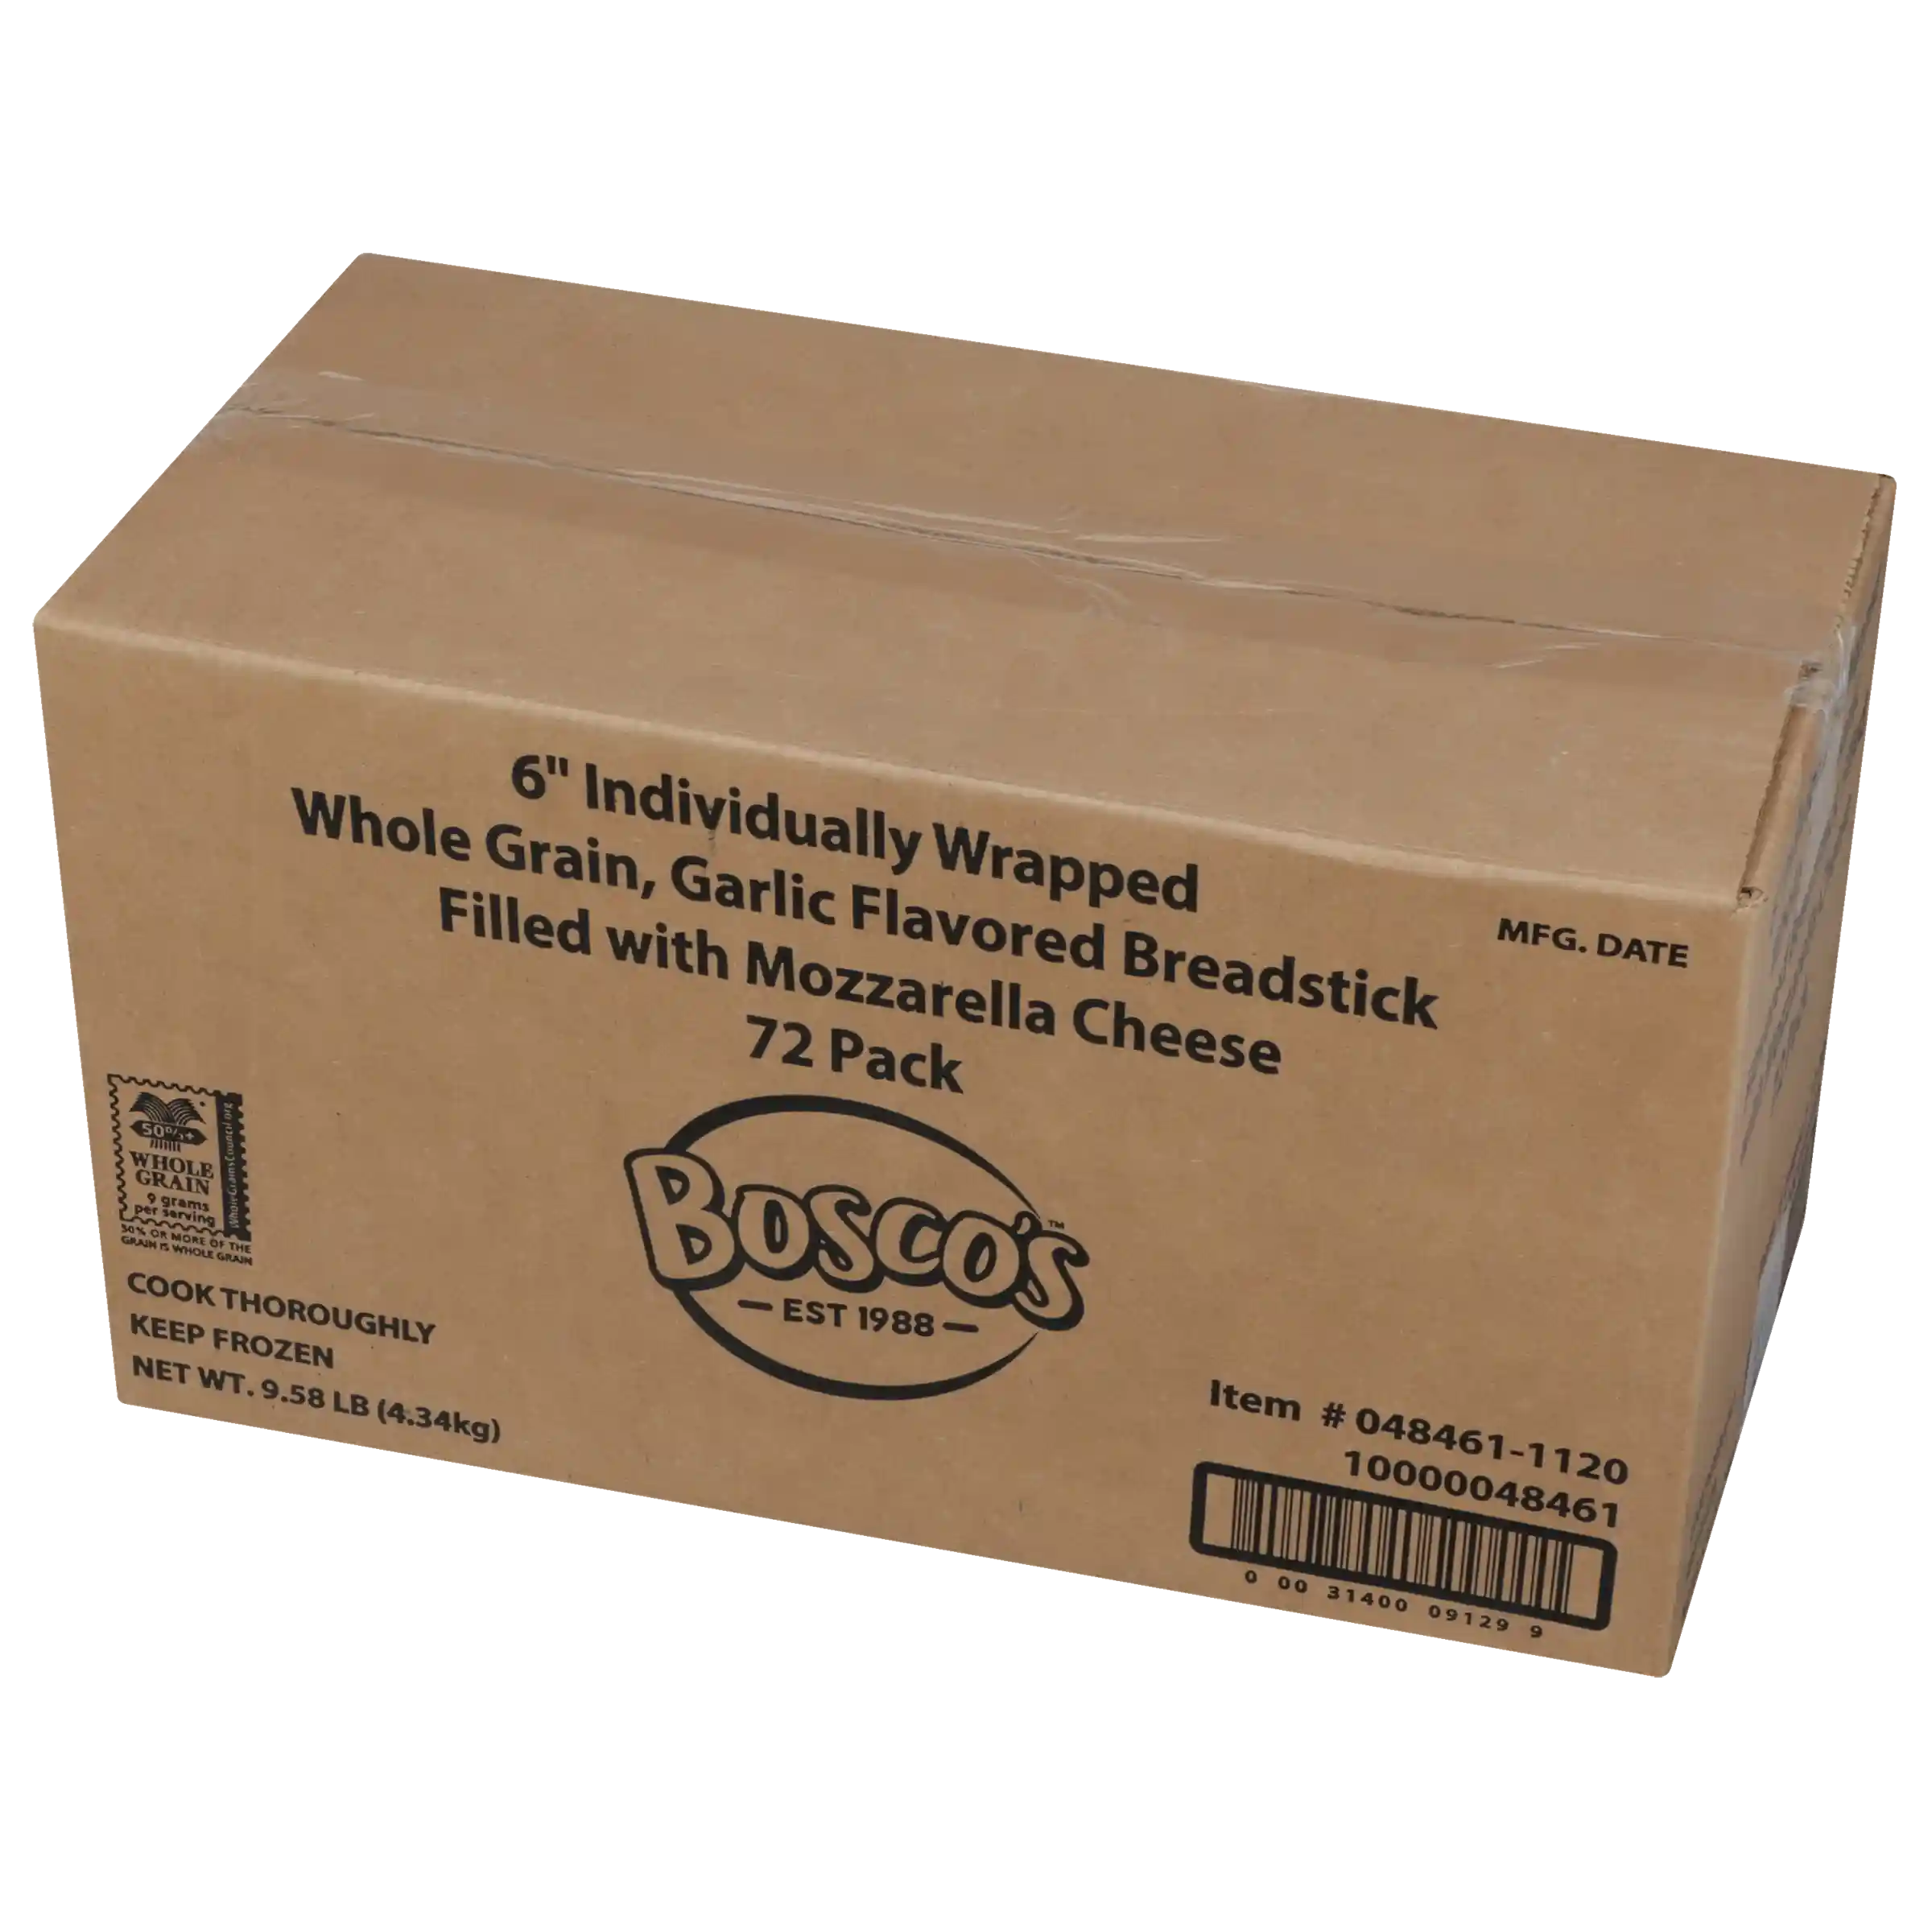 Bosco® Individually Wrapped Whole Grain Garlic Flavored Cheese Stuffed Breadsticks, 2.23 oz._image_41